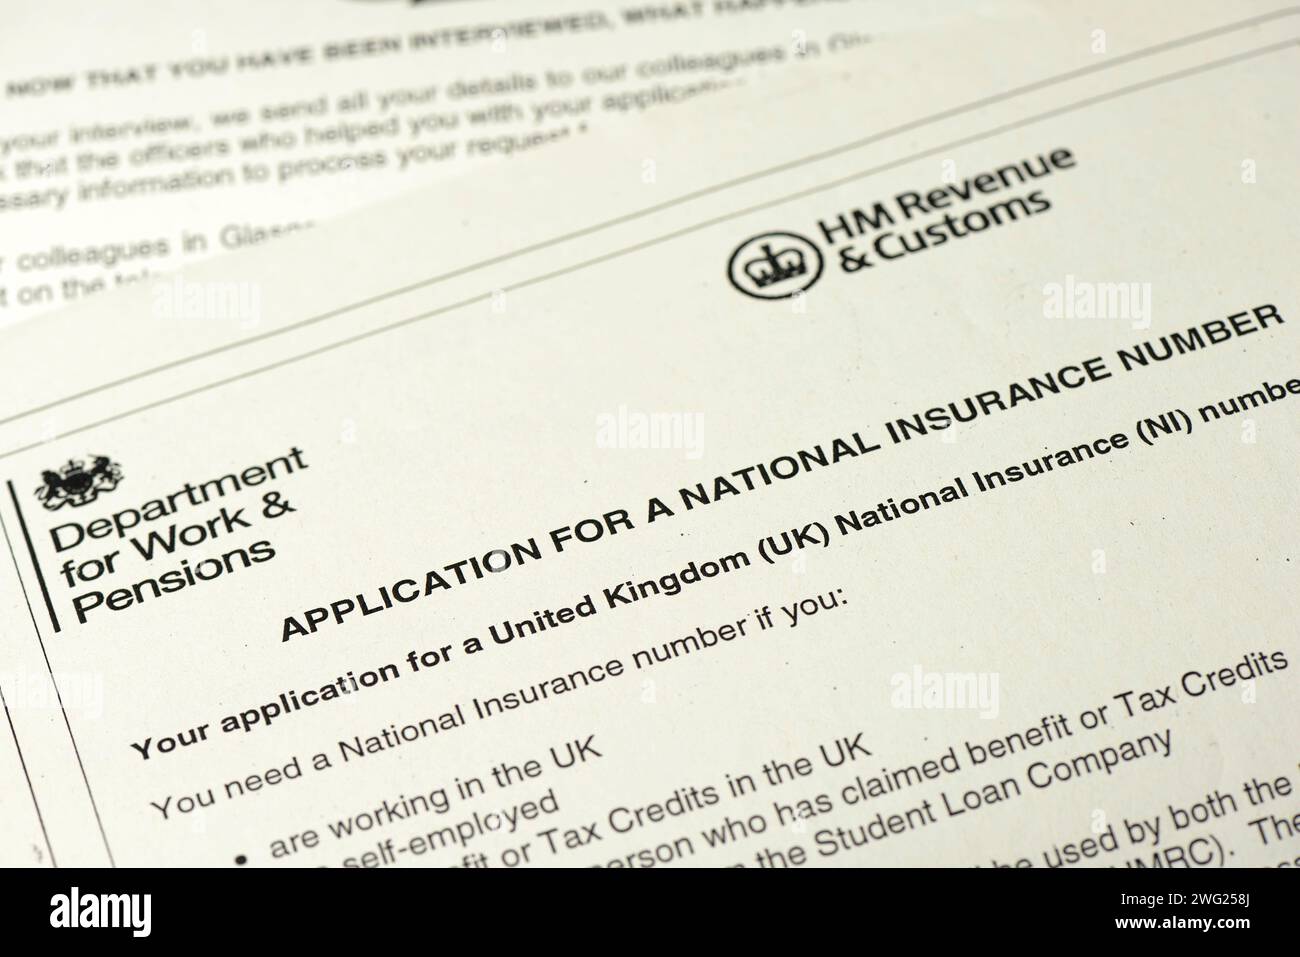 Application for a national insurance number form document by the Department for Work and Pensions in UK issued in 2014 Stock Photo